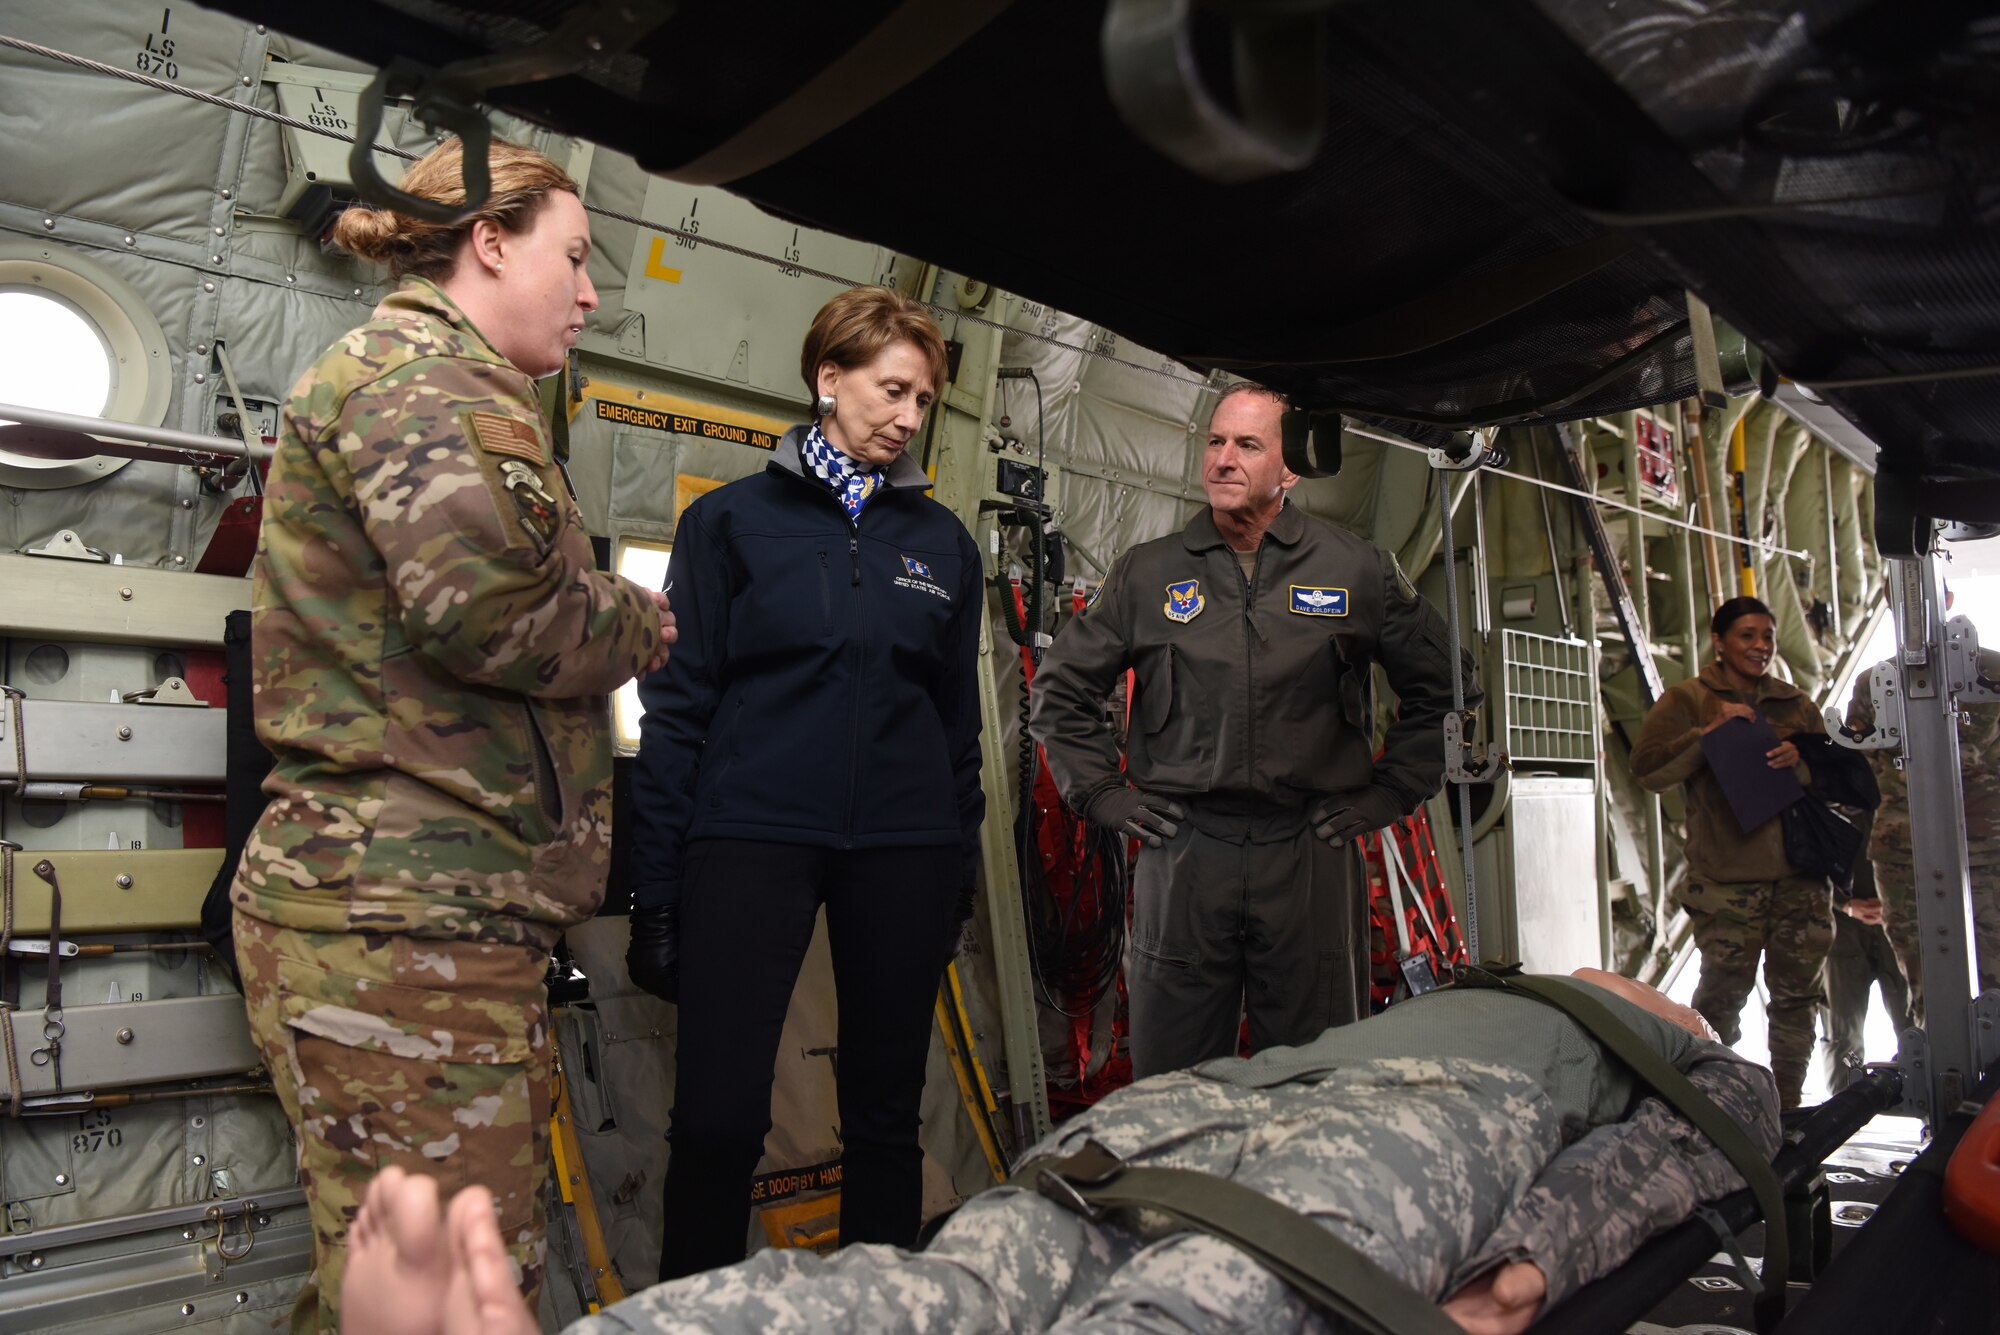 Secretary of the Air Force Barbara Barrett and Air Force Chief of Staff Gen. David L. Goldfein visit with members of the 86th Aeromedical Evacuation Squadron on a U.S. Air Force C-130J Super Hercules aircraft during a visit to Ramstein Air Base, Germany, Nov. 22, 2019.